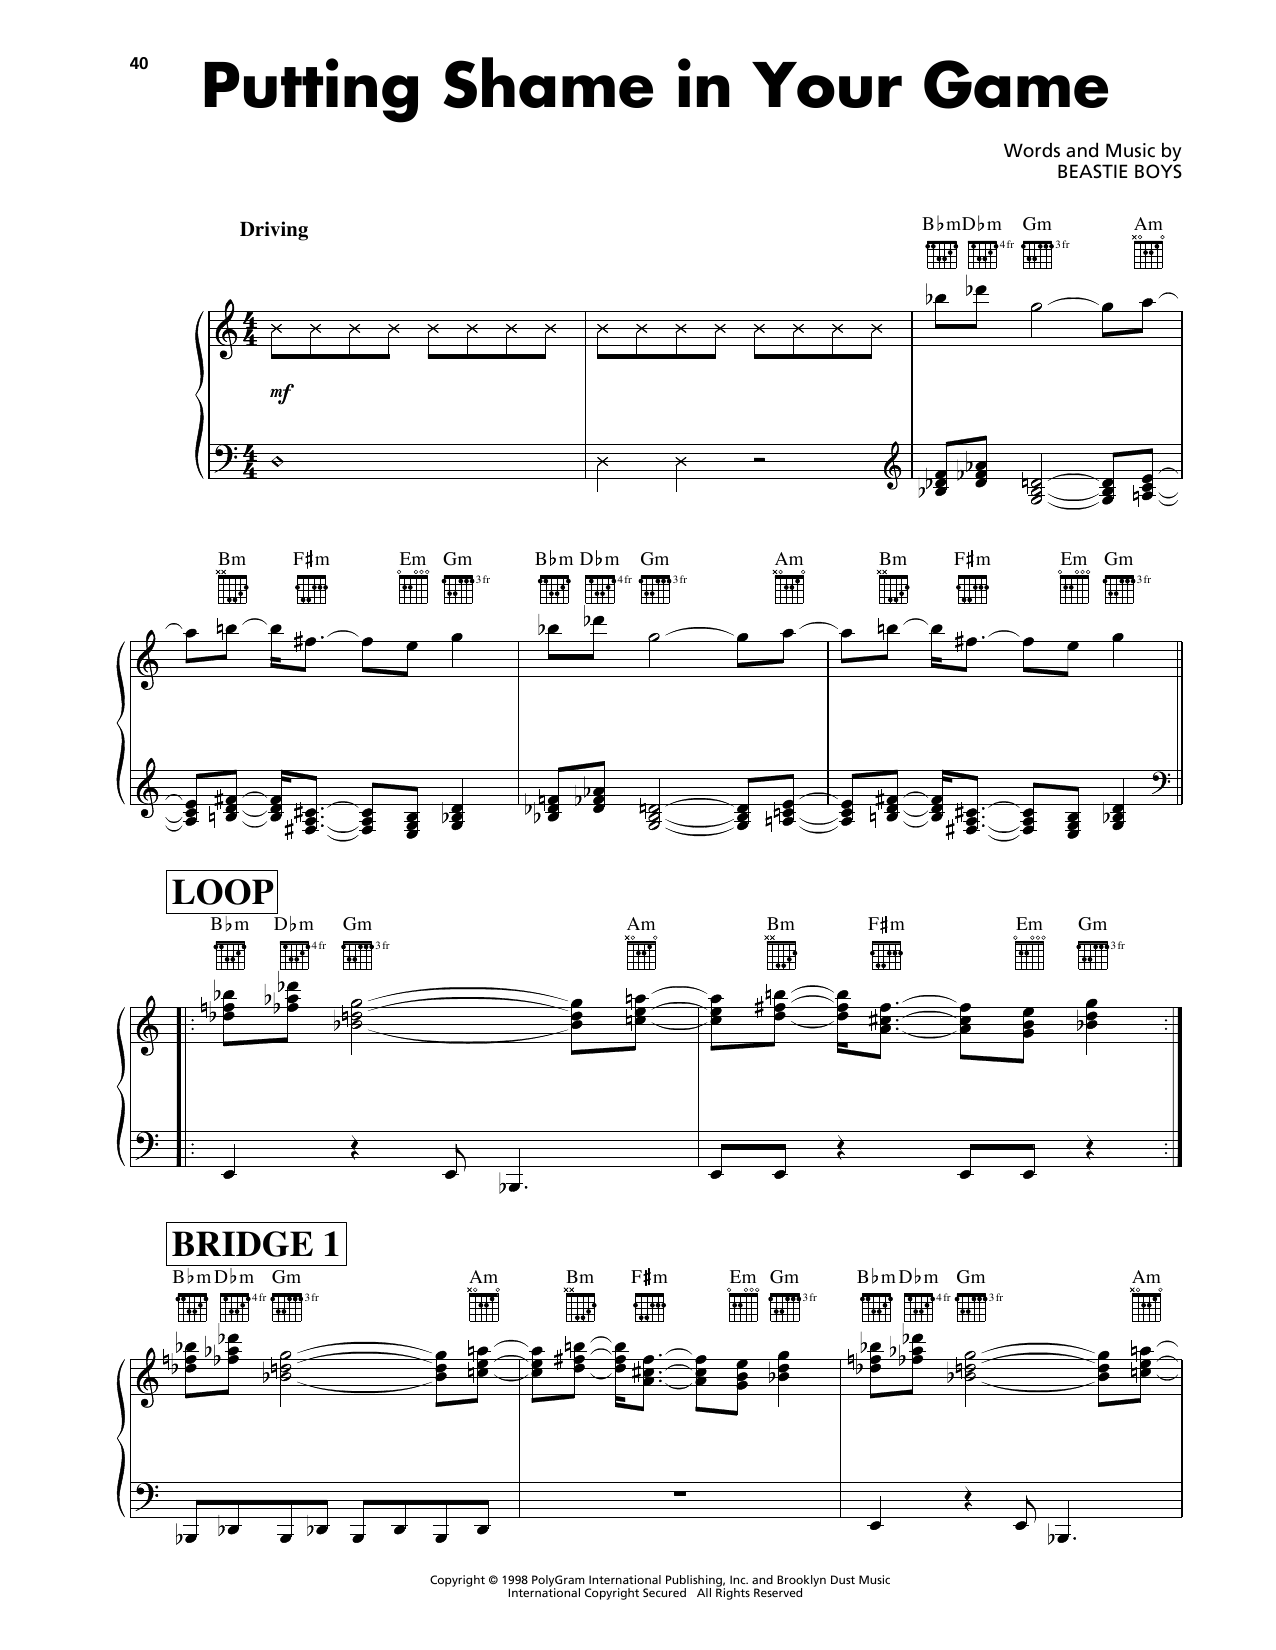 Download Beastie Boys Putting Shame In Your Game Sheet Music